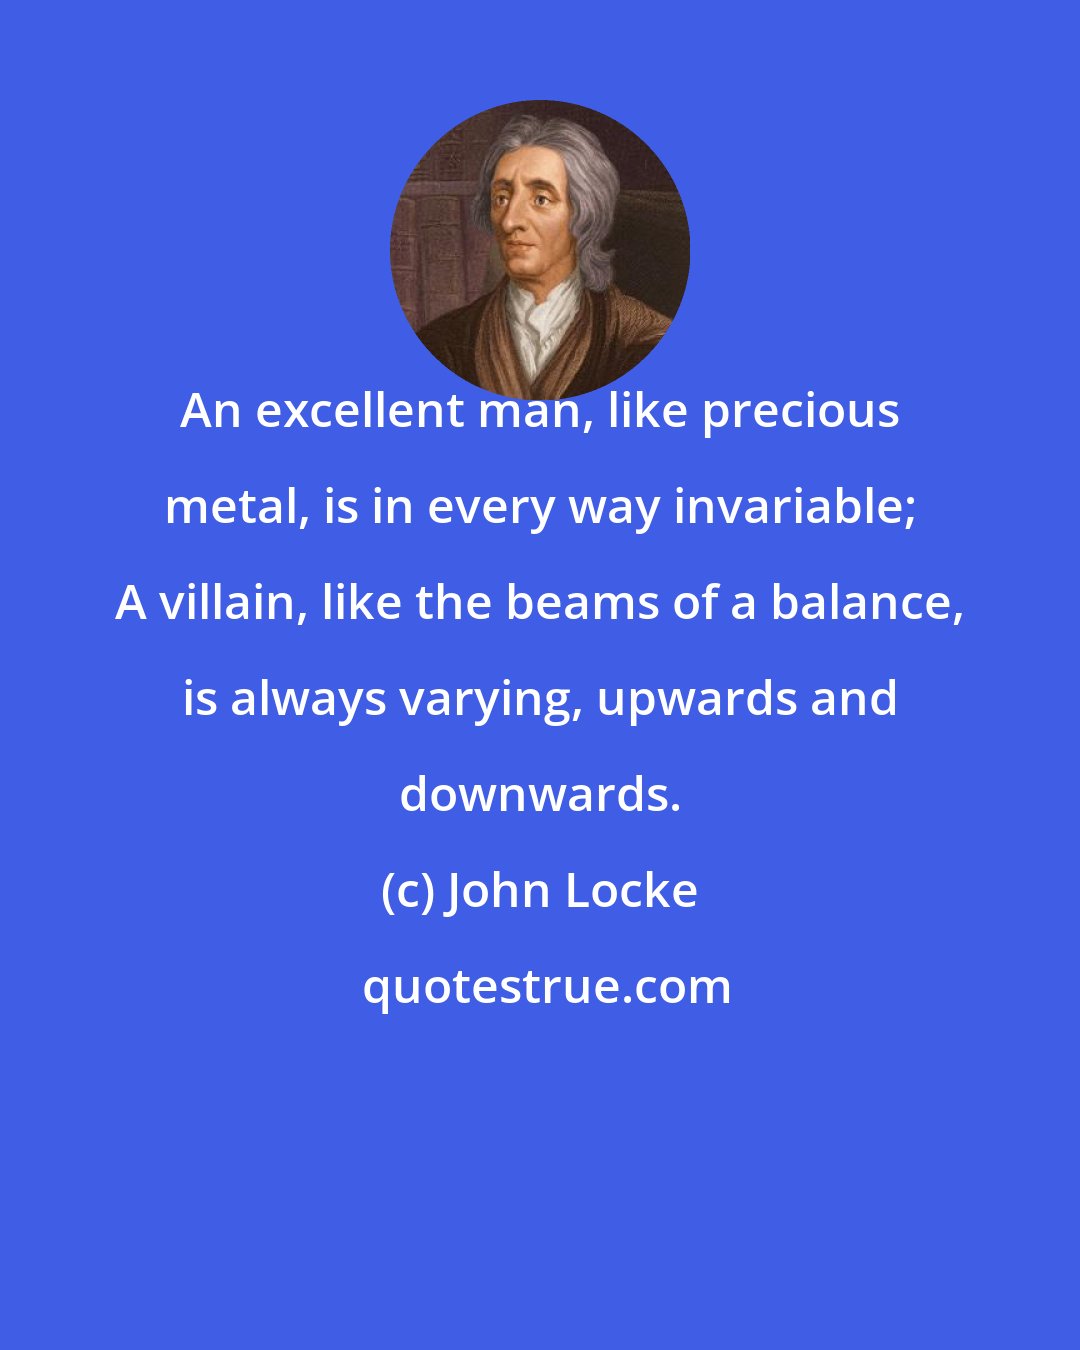 John Locke: An excellent man, like precious metal, is in every way invariable; A villain, like the beams of a balance, is always varying, upwards and downwards.